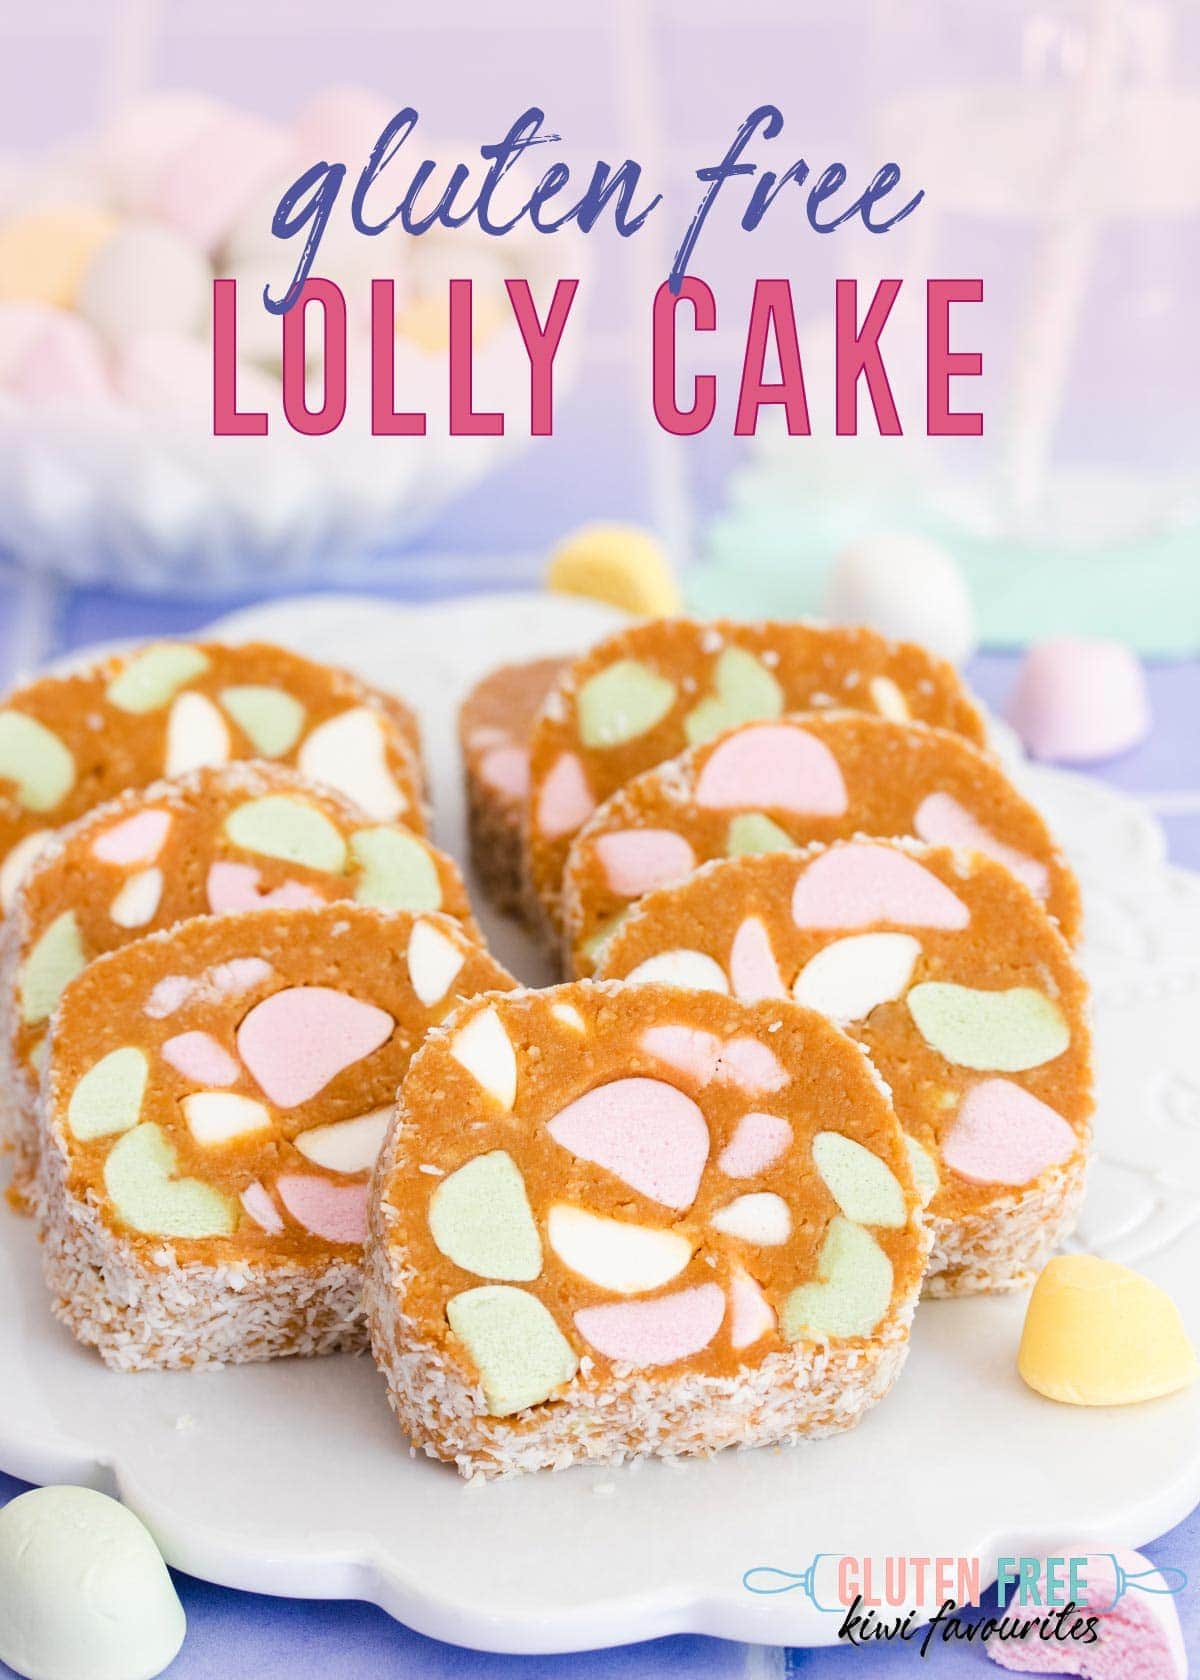 Pieces of lolly cake on a white plate, text overlay reads "gluten free lolly cake" in blue and pink letters.